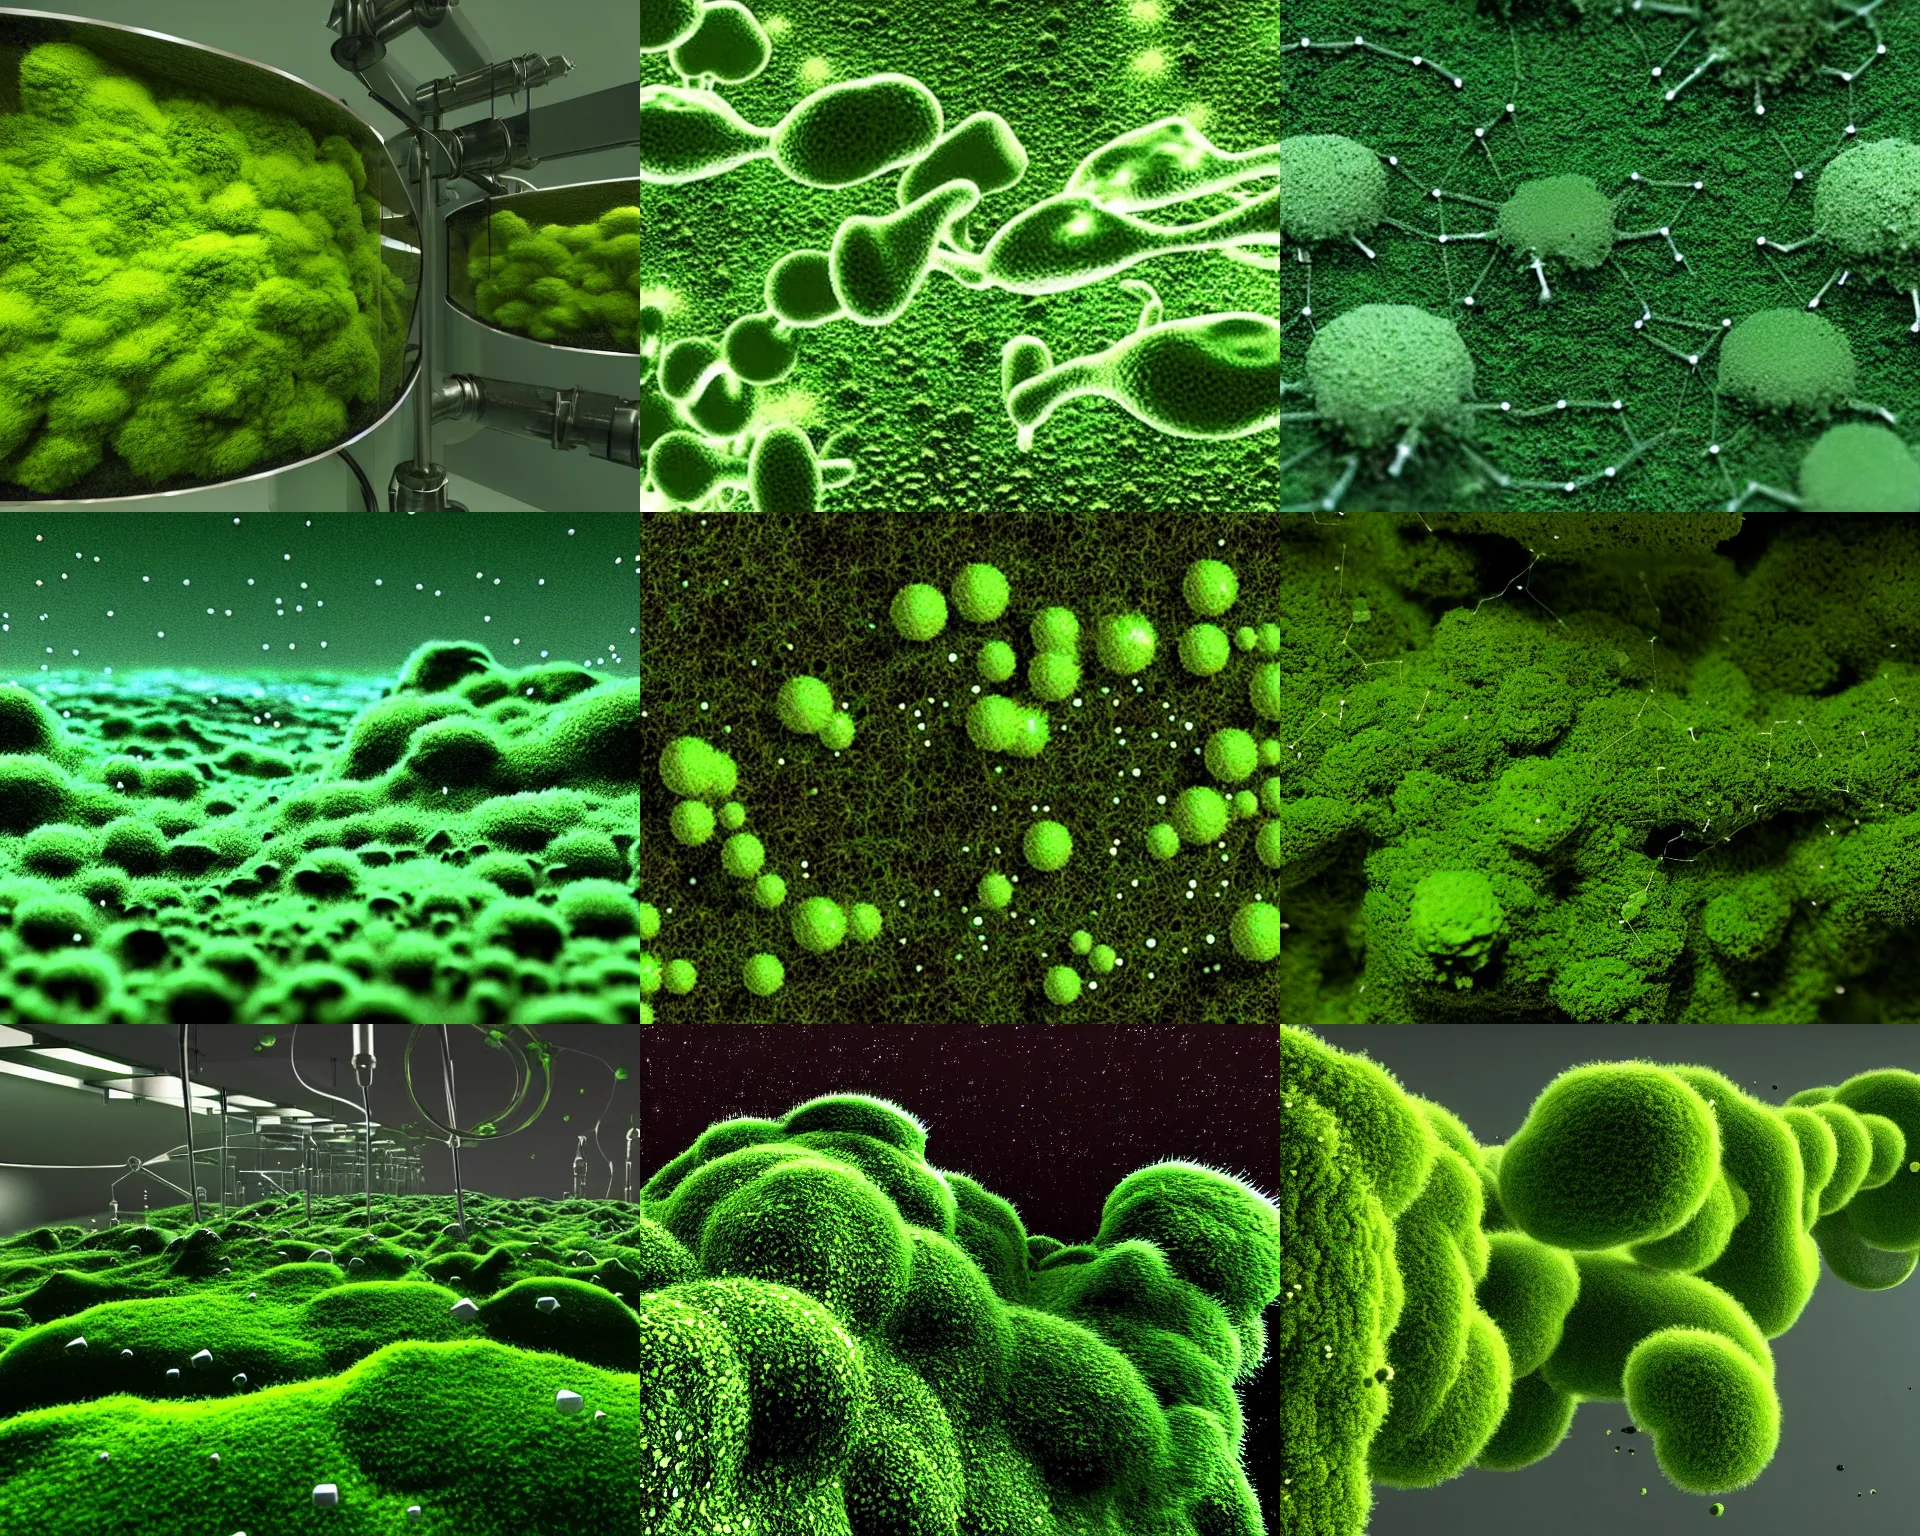 Prompt: nanomachines gathered nitrogen from the air and herded it together into floating spores ; inside the spores, other machines rearranged the materials into simple nutrients to keep the moss green and healthy during the night global illumination ray tracing advanced technology chaykin howard and campionpascale and cooke darwyn and davis jack